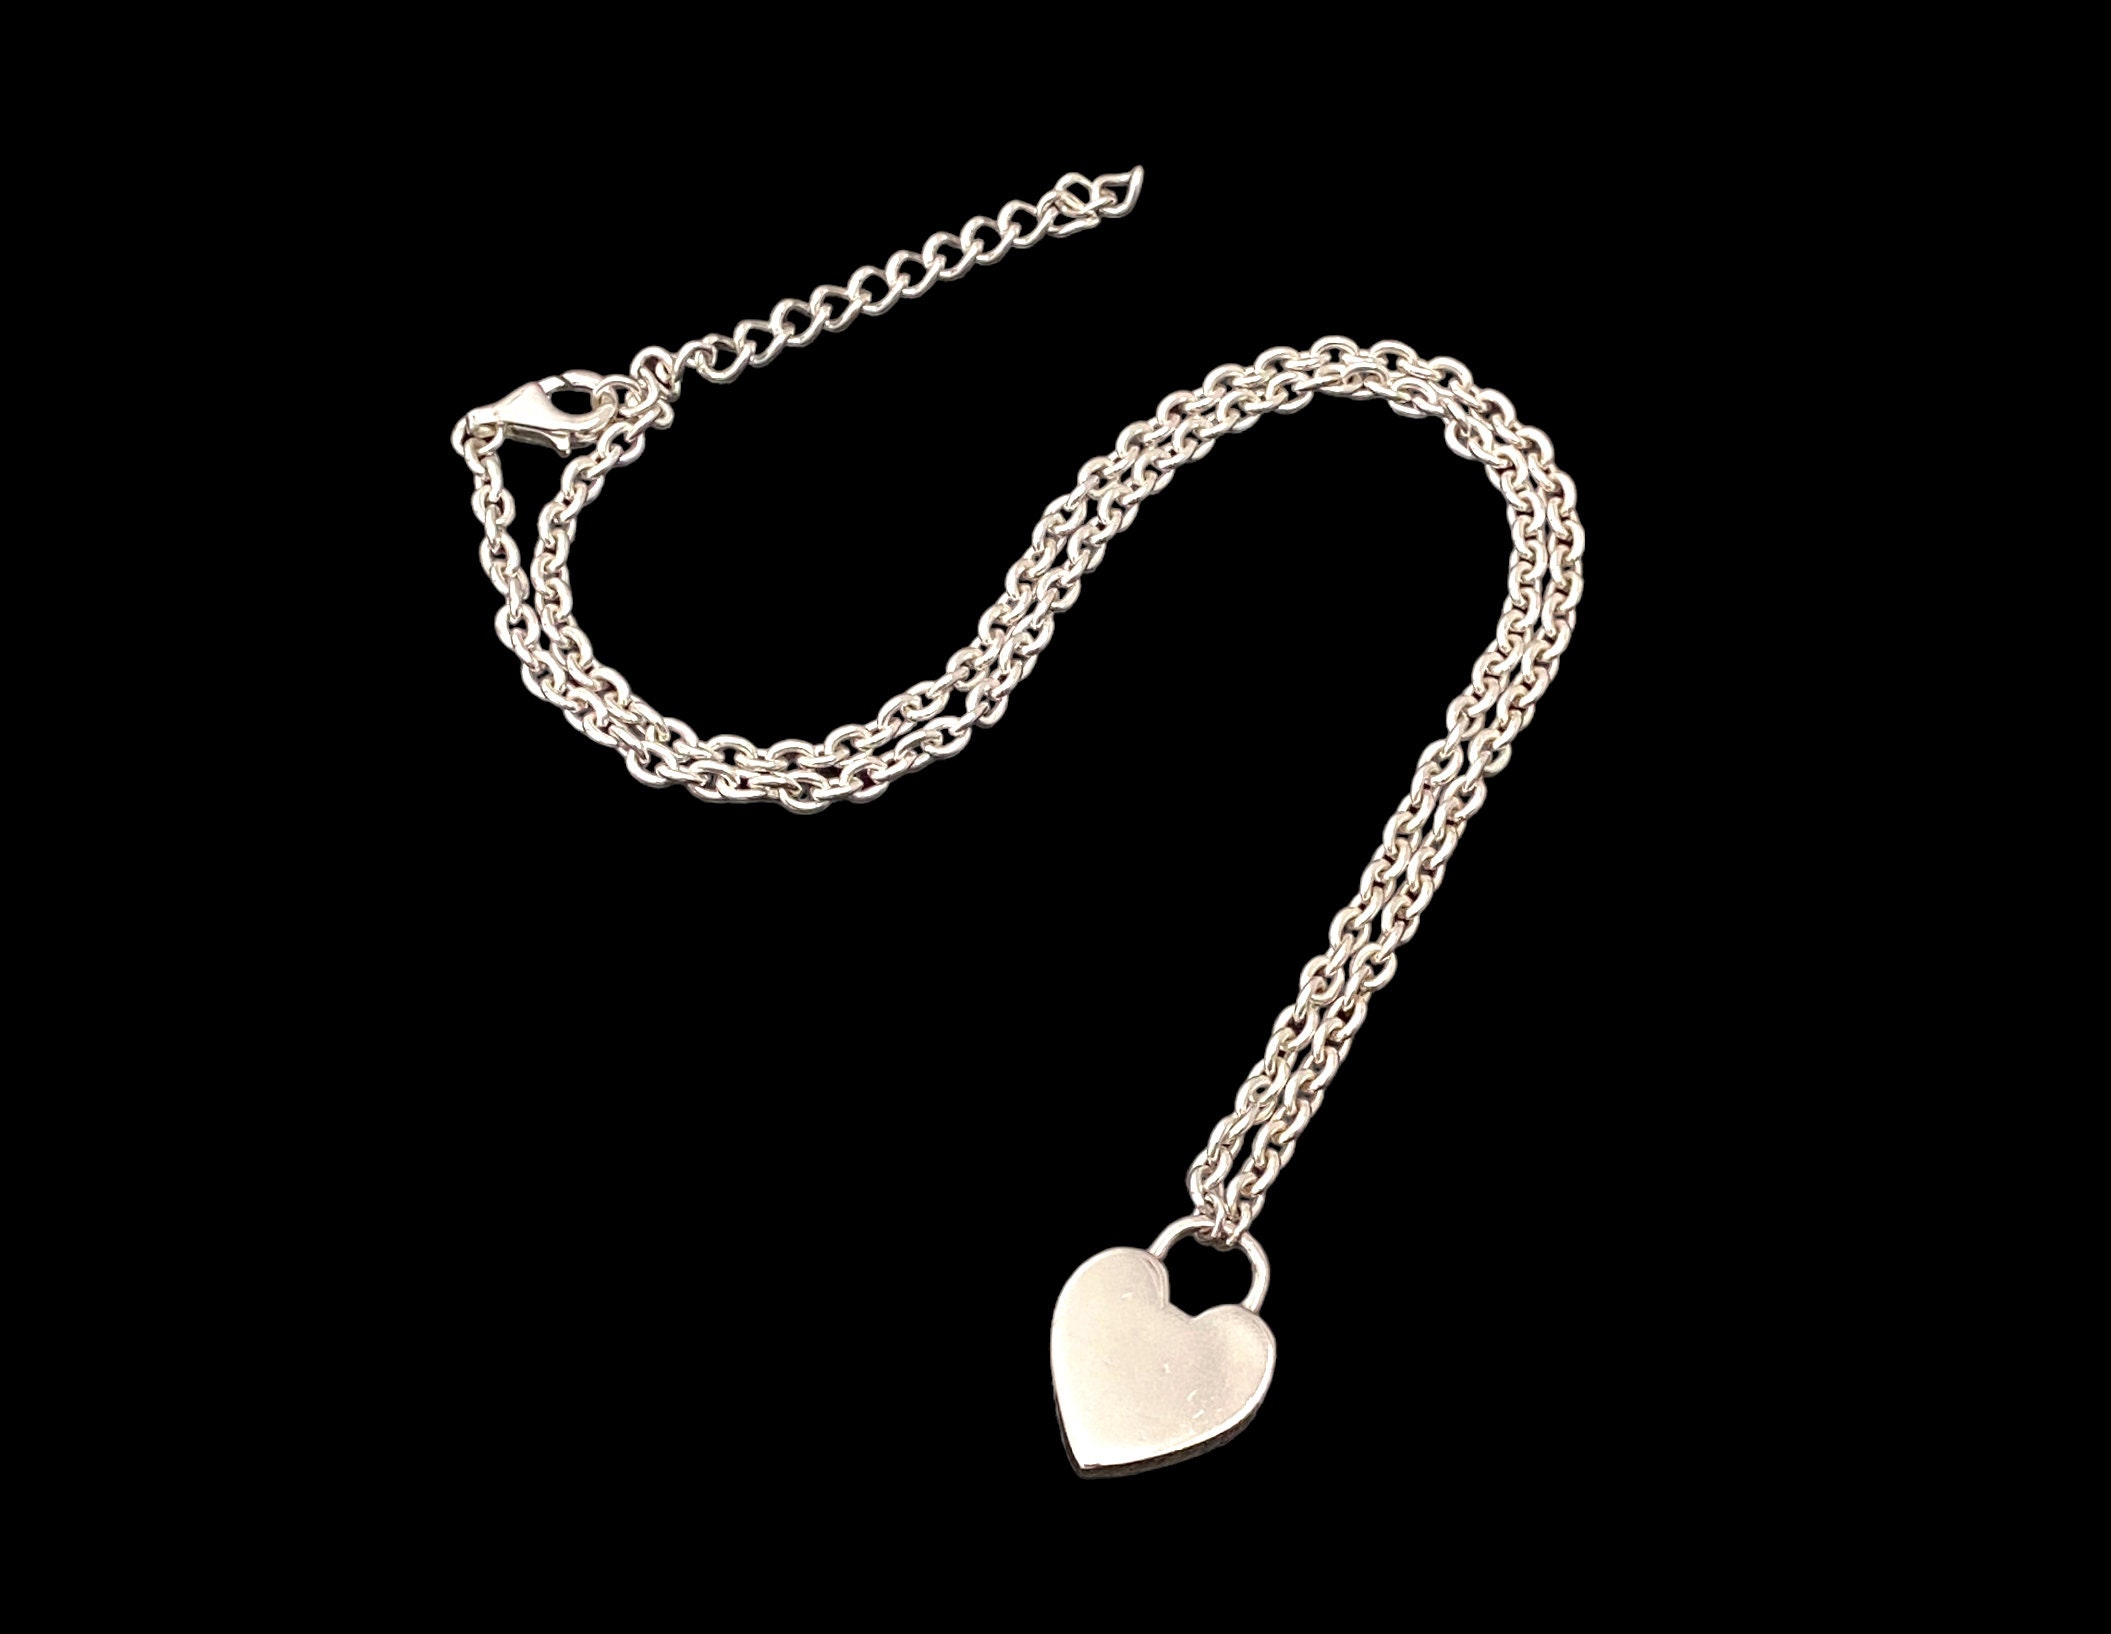 Seamstress Measuring Tape Pendant Necklace Silver Plated Charm Heart  Necklace Tape Measure Gift For Seamstress Designer - AliExpress